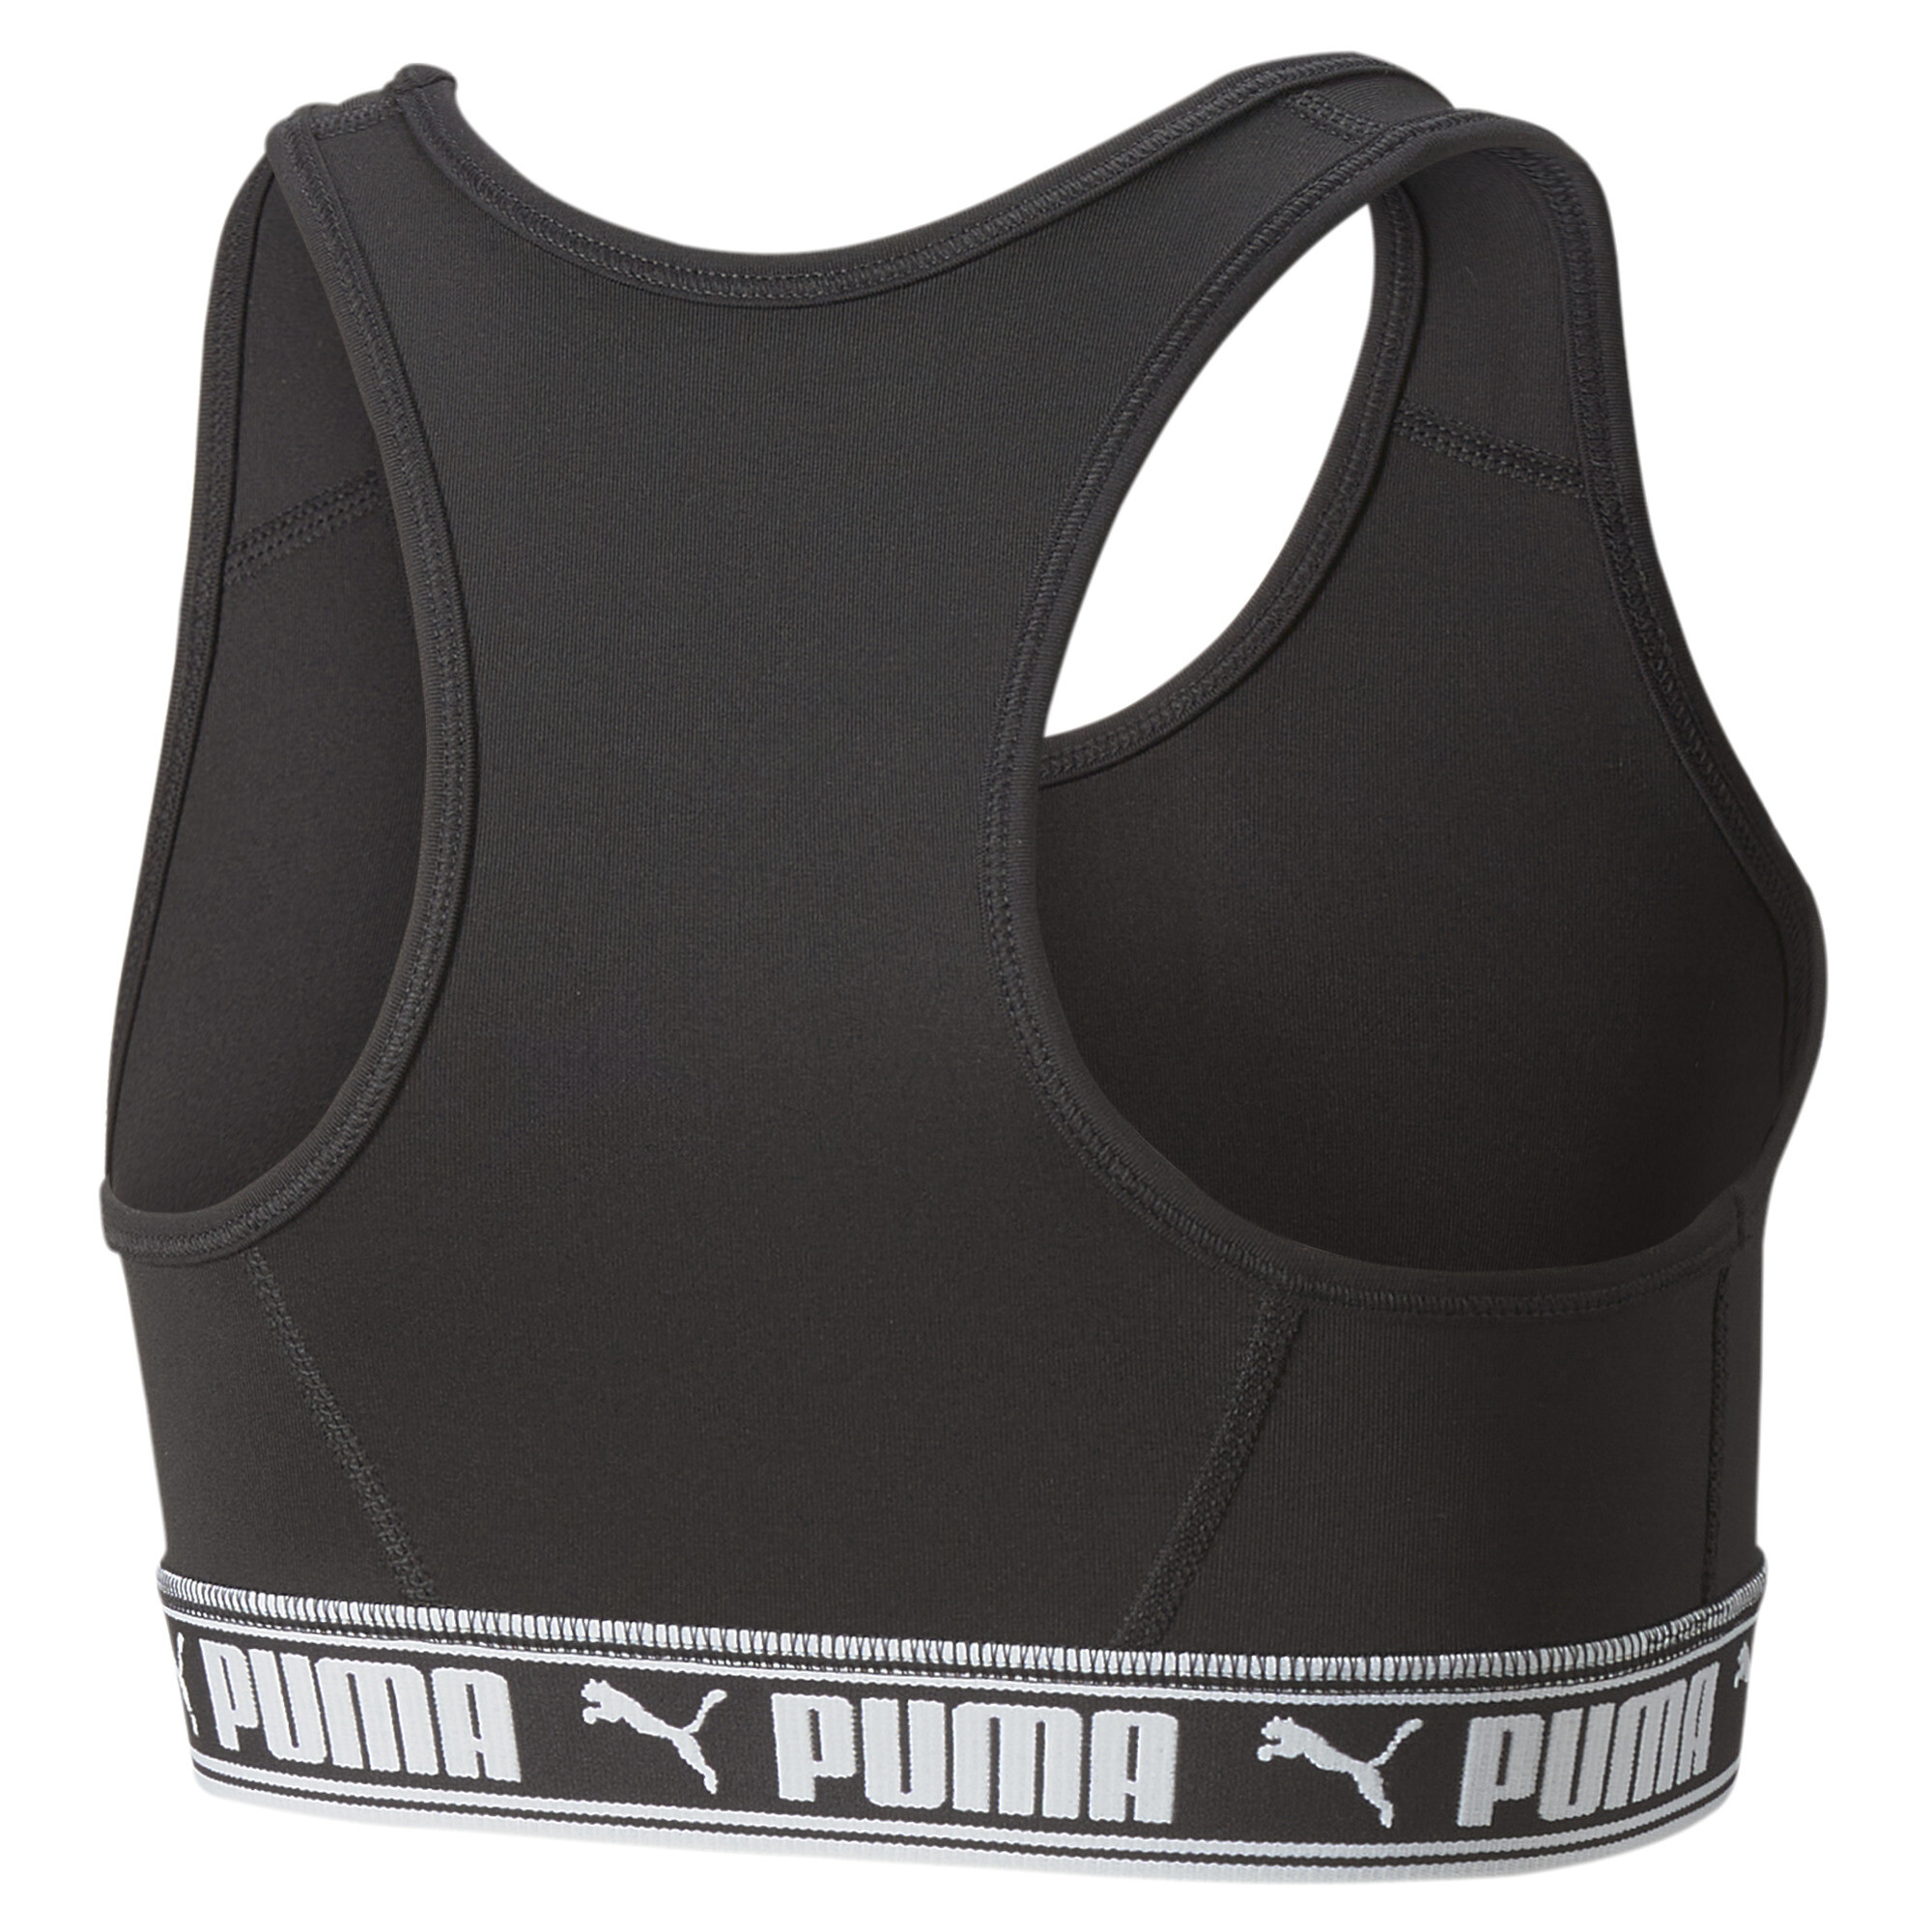 Women's Puma Strong Bra Youth, Black, Size 9-10Y, Clothing